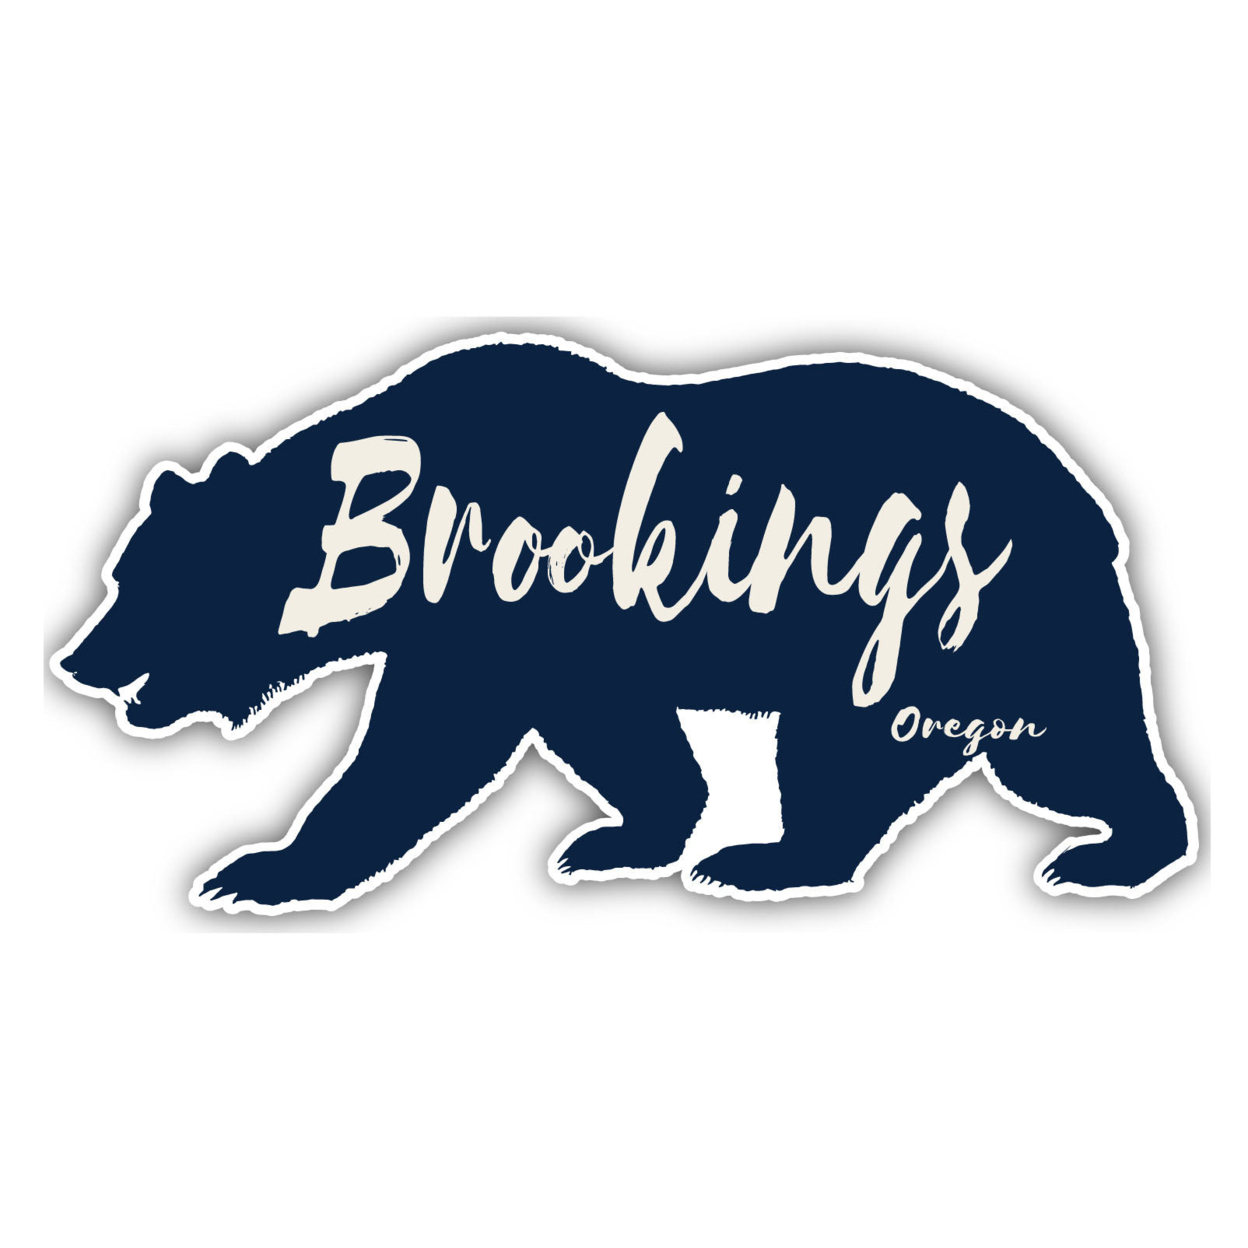 Brookings Oregon Souvenir Decorative Stickers (Choose Theme And Size) - 4-Pack, 4-Inch, Bear